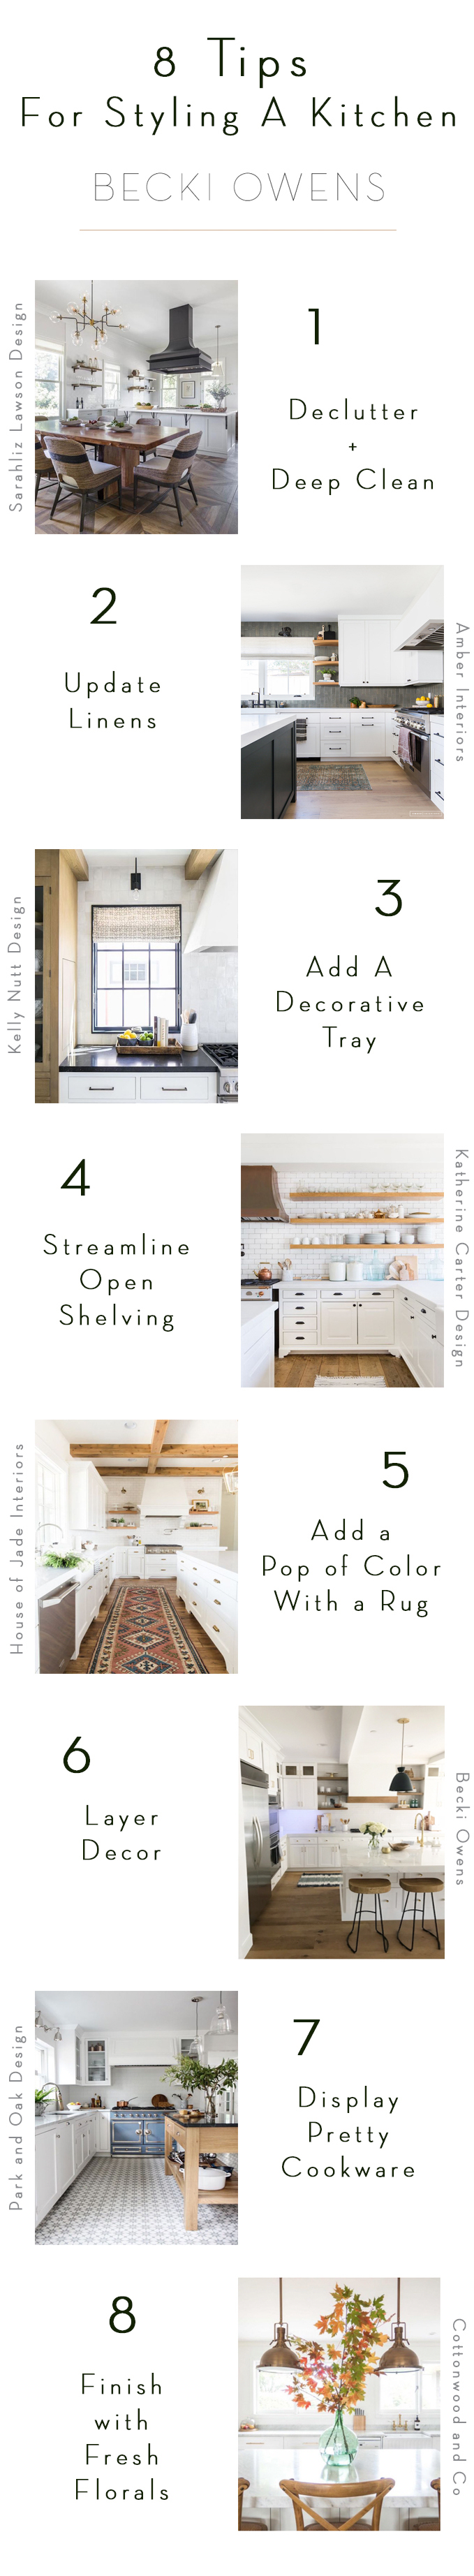 8 Tips for Styling Your Kitchen